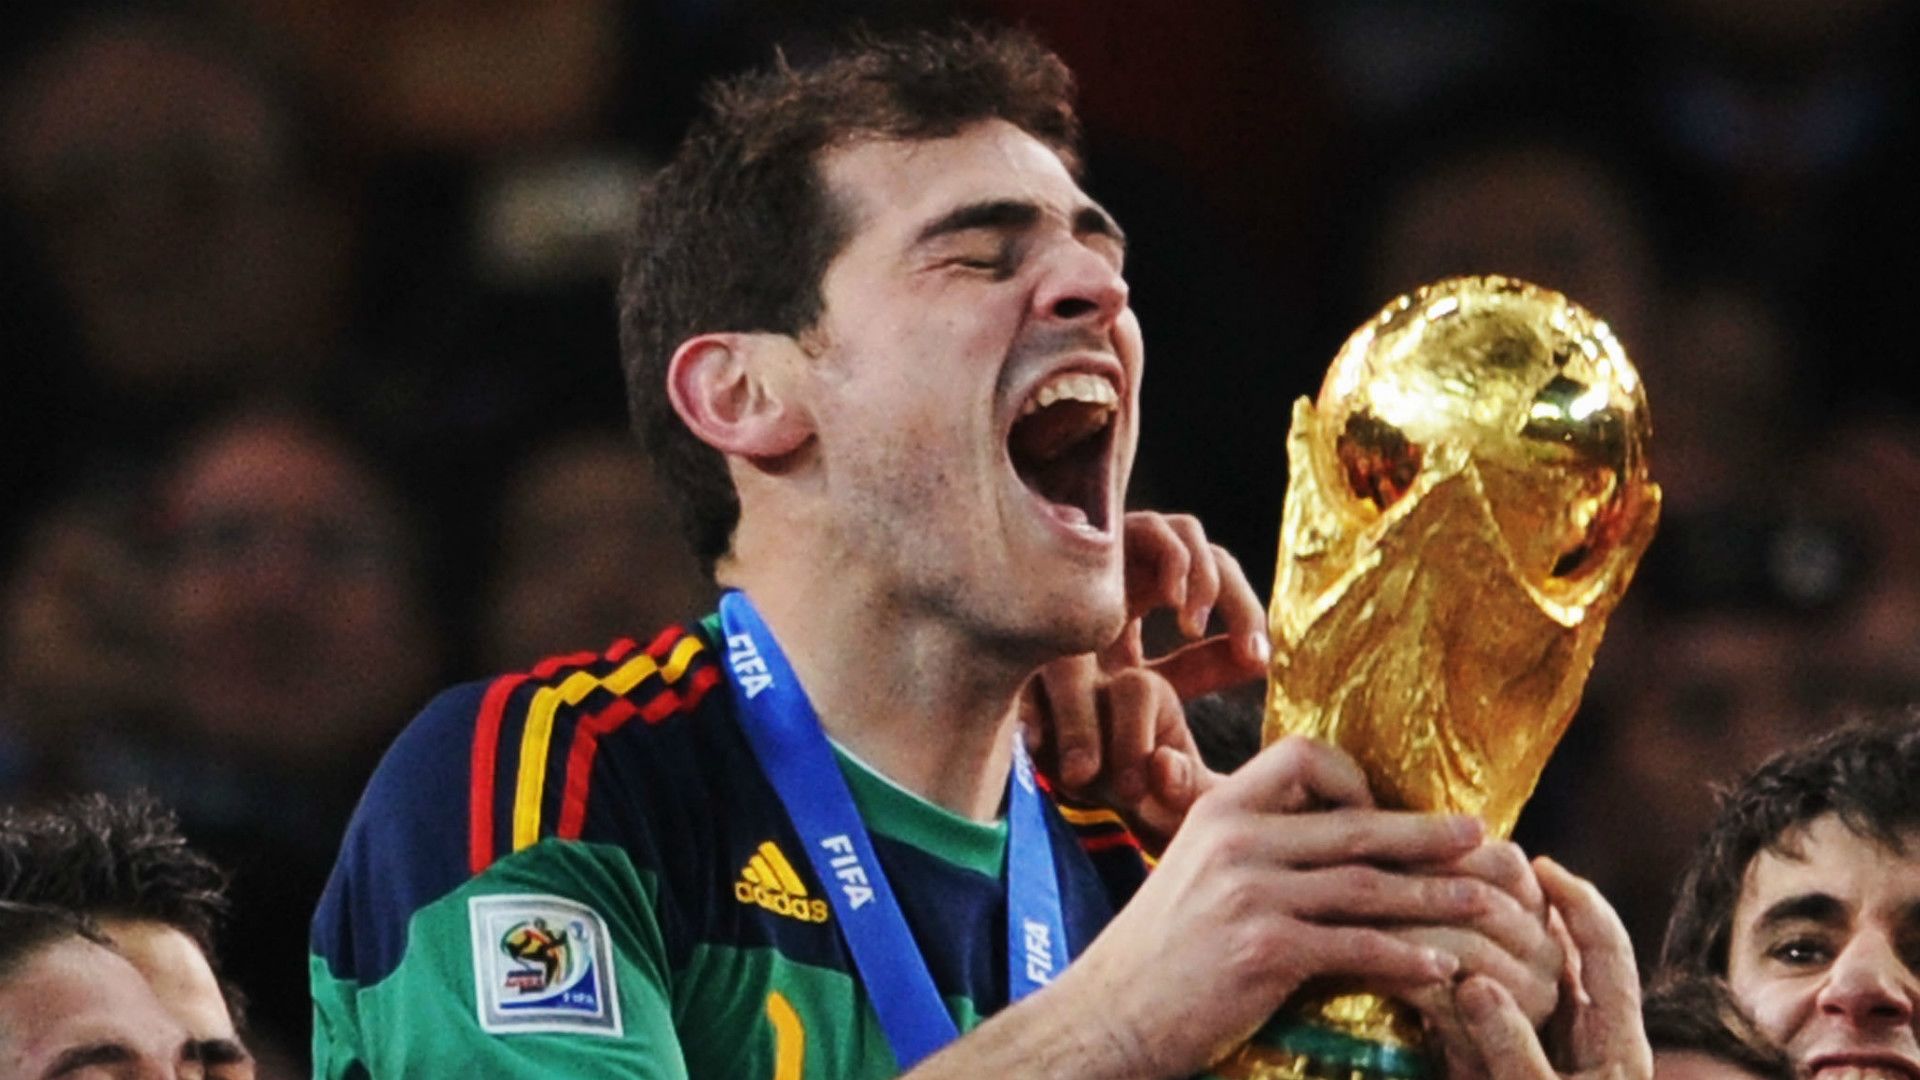 World and European champion Iker Casillas tweets about being gay